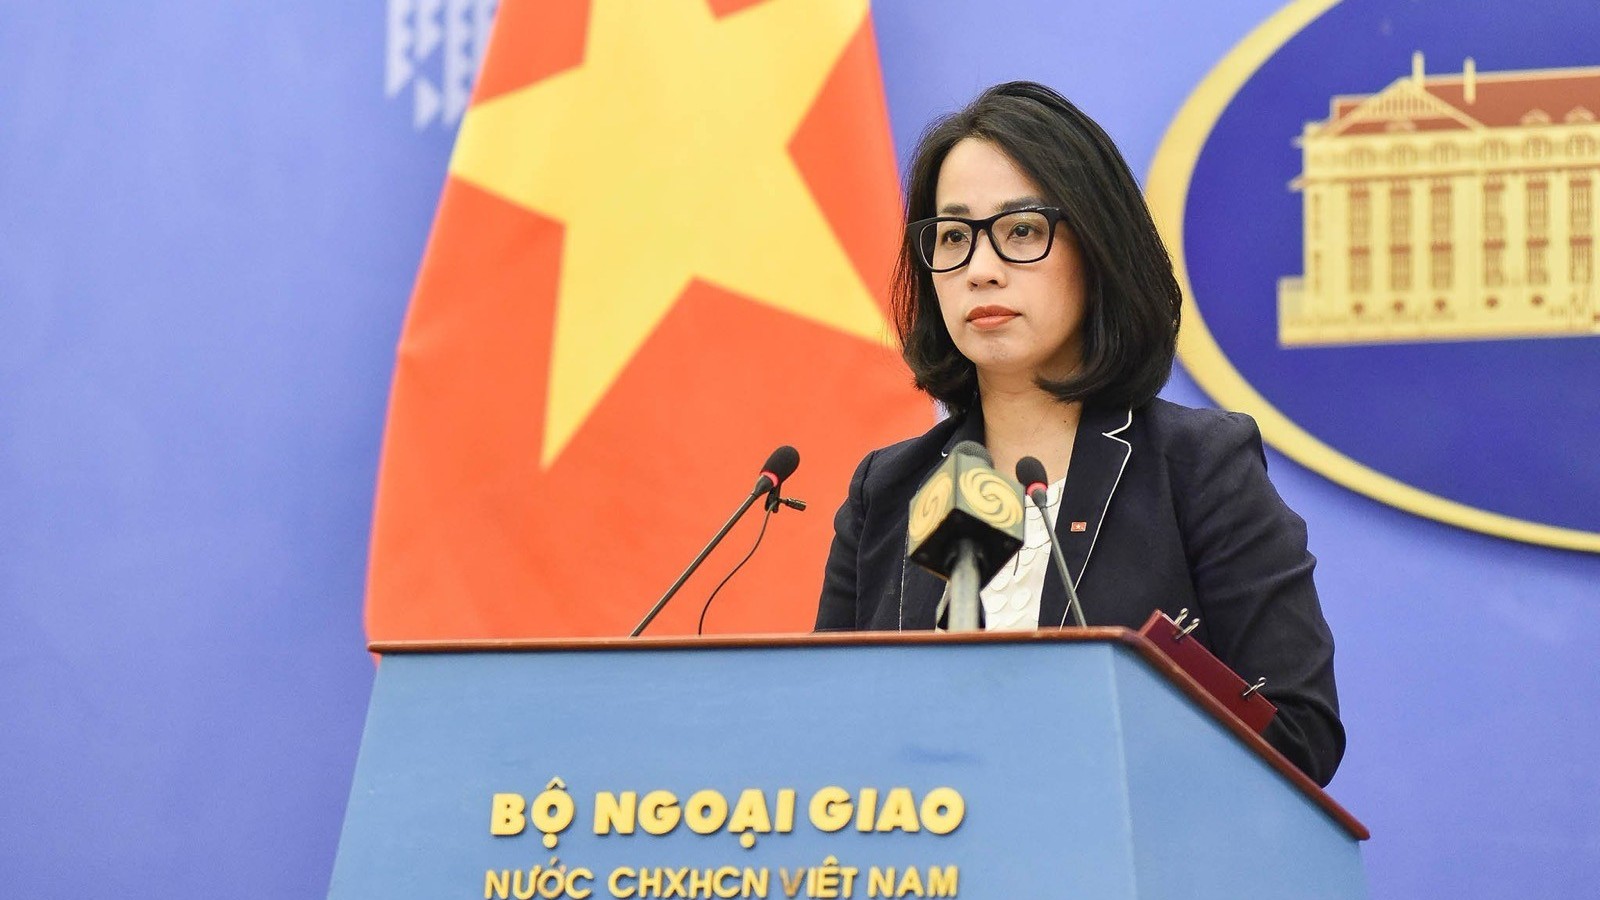 Vietnam deeply concerned about tension escalation in Middle East: Foreign Ministry spokesperson